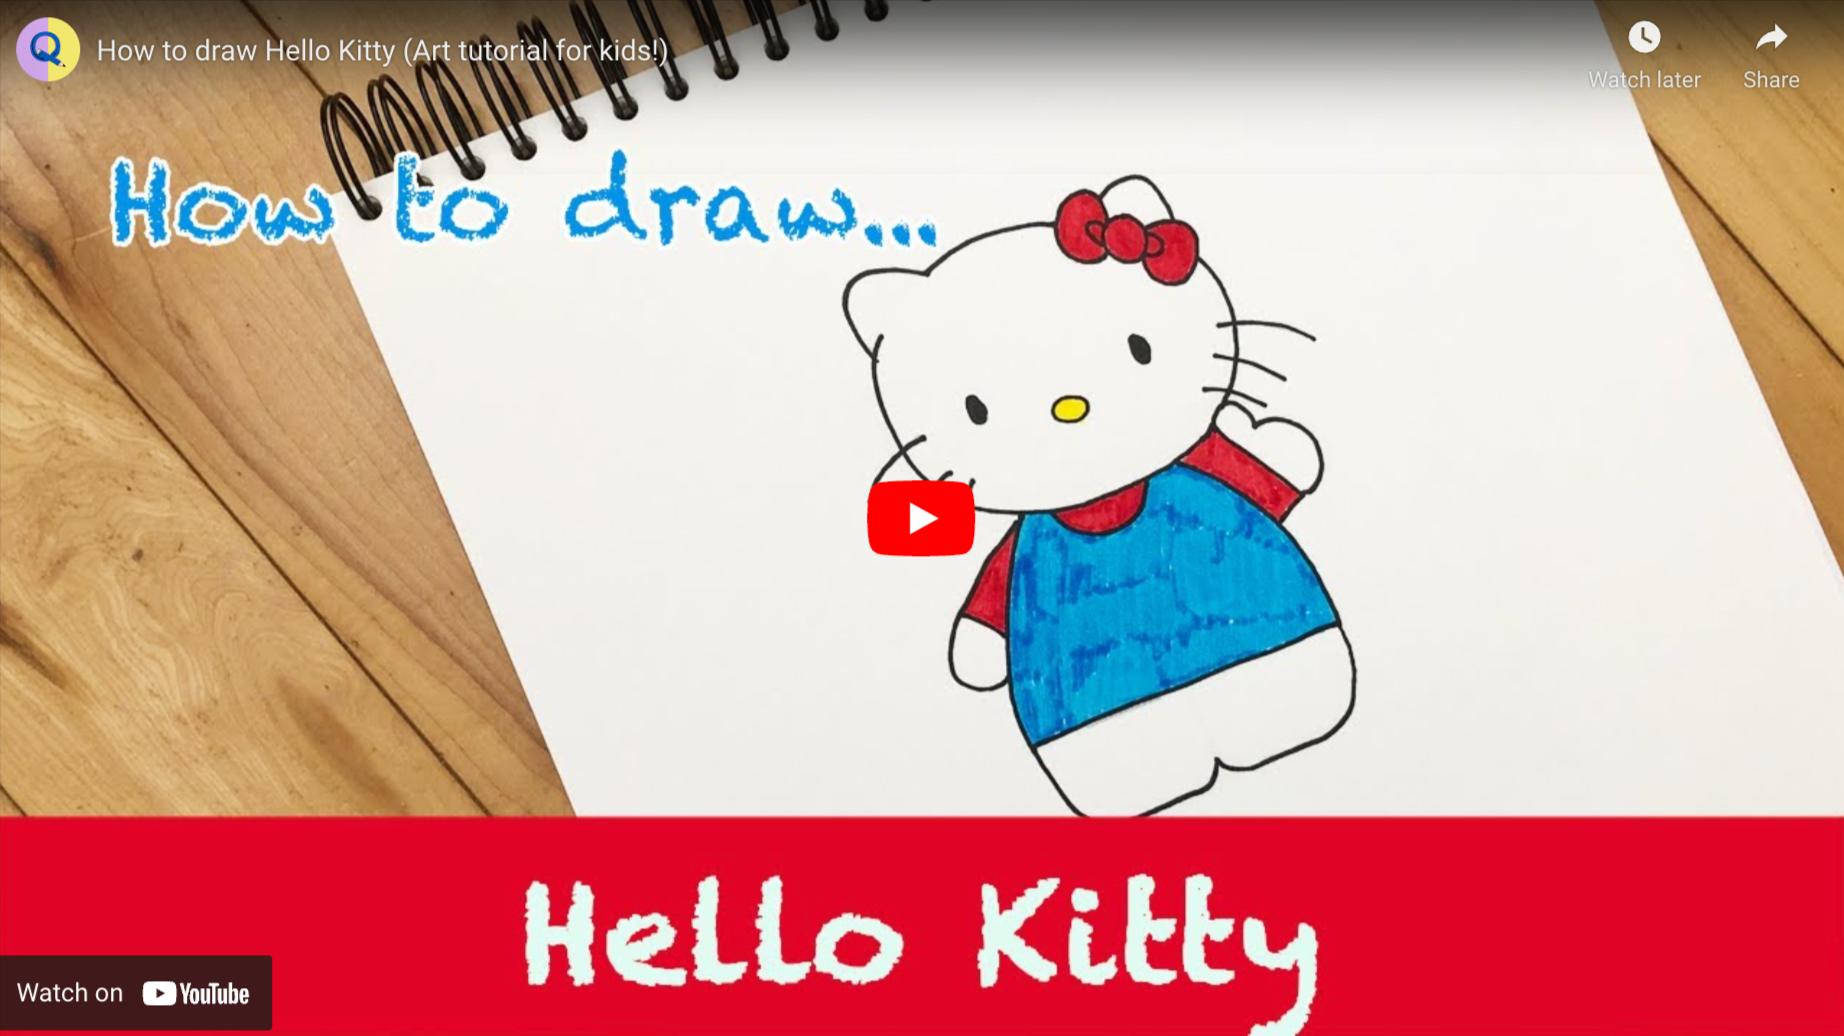 https://quickdrawart.com/cdn/shop/files/How-to-draw-Hello-Kitty-_-quickdraw-art-videos.png?v=1663162935&width=1920